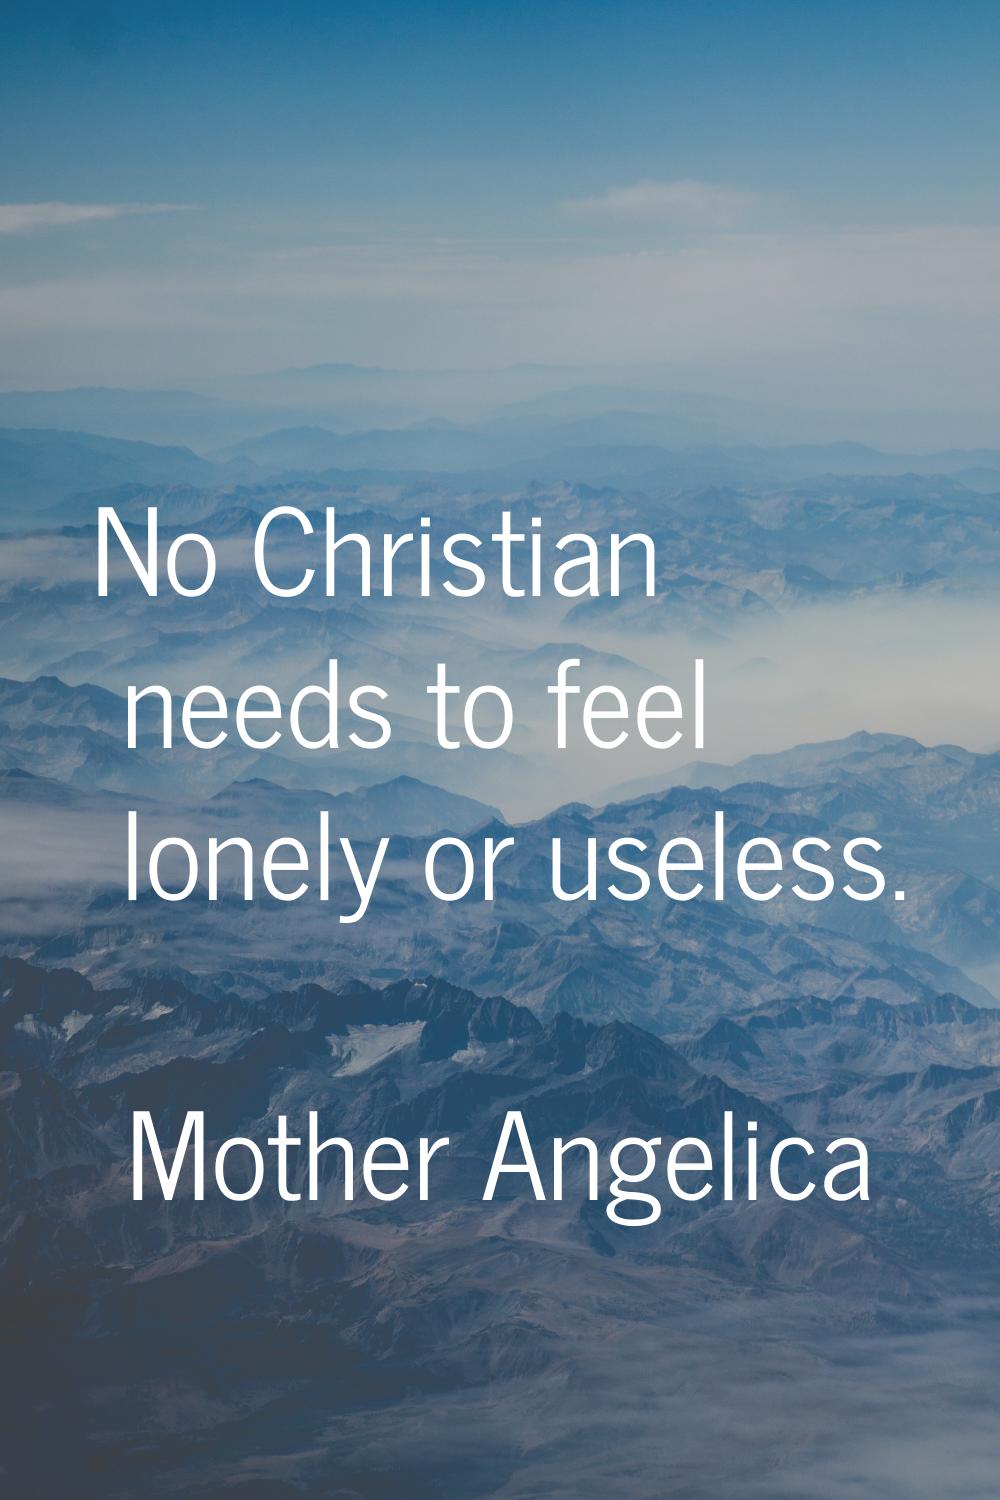 No Christian needs to feel lonely or useless.